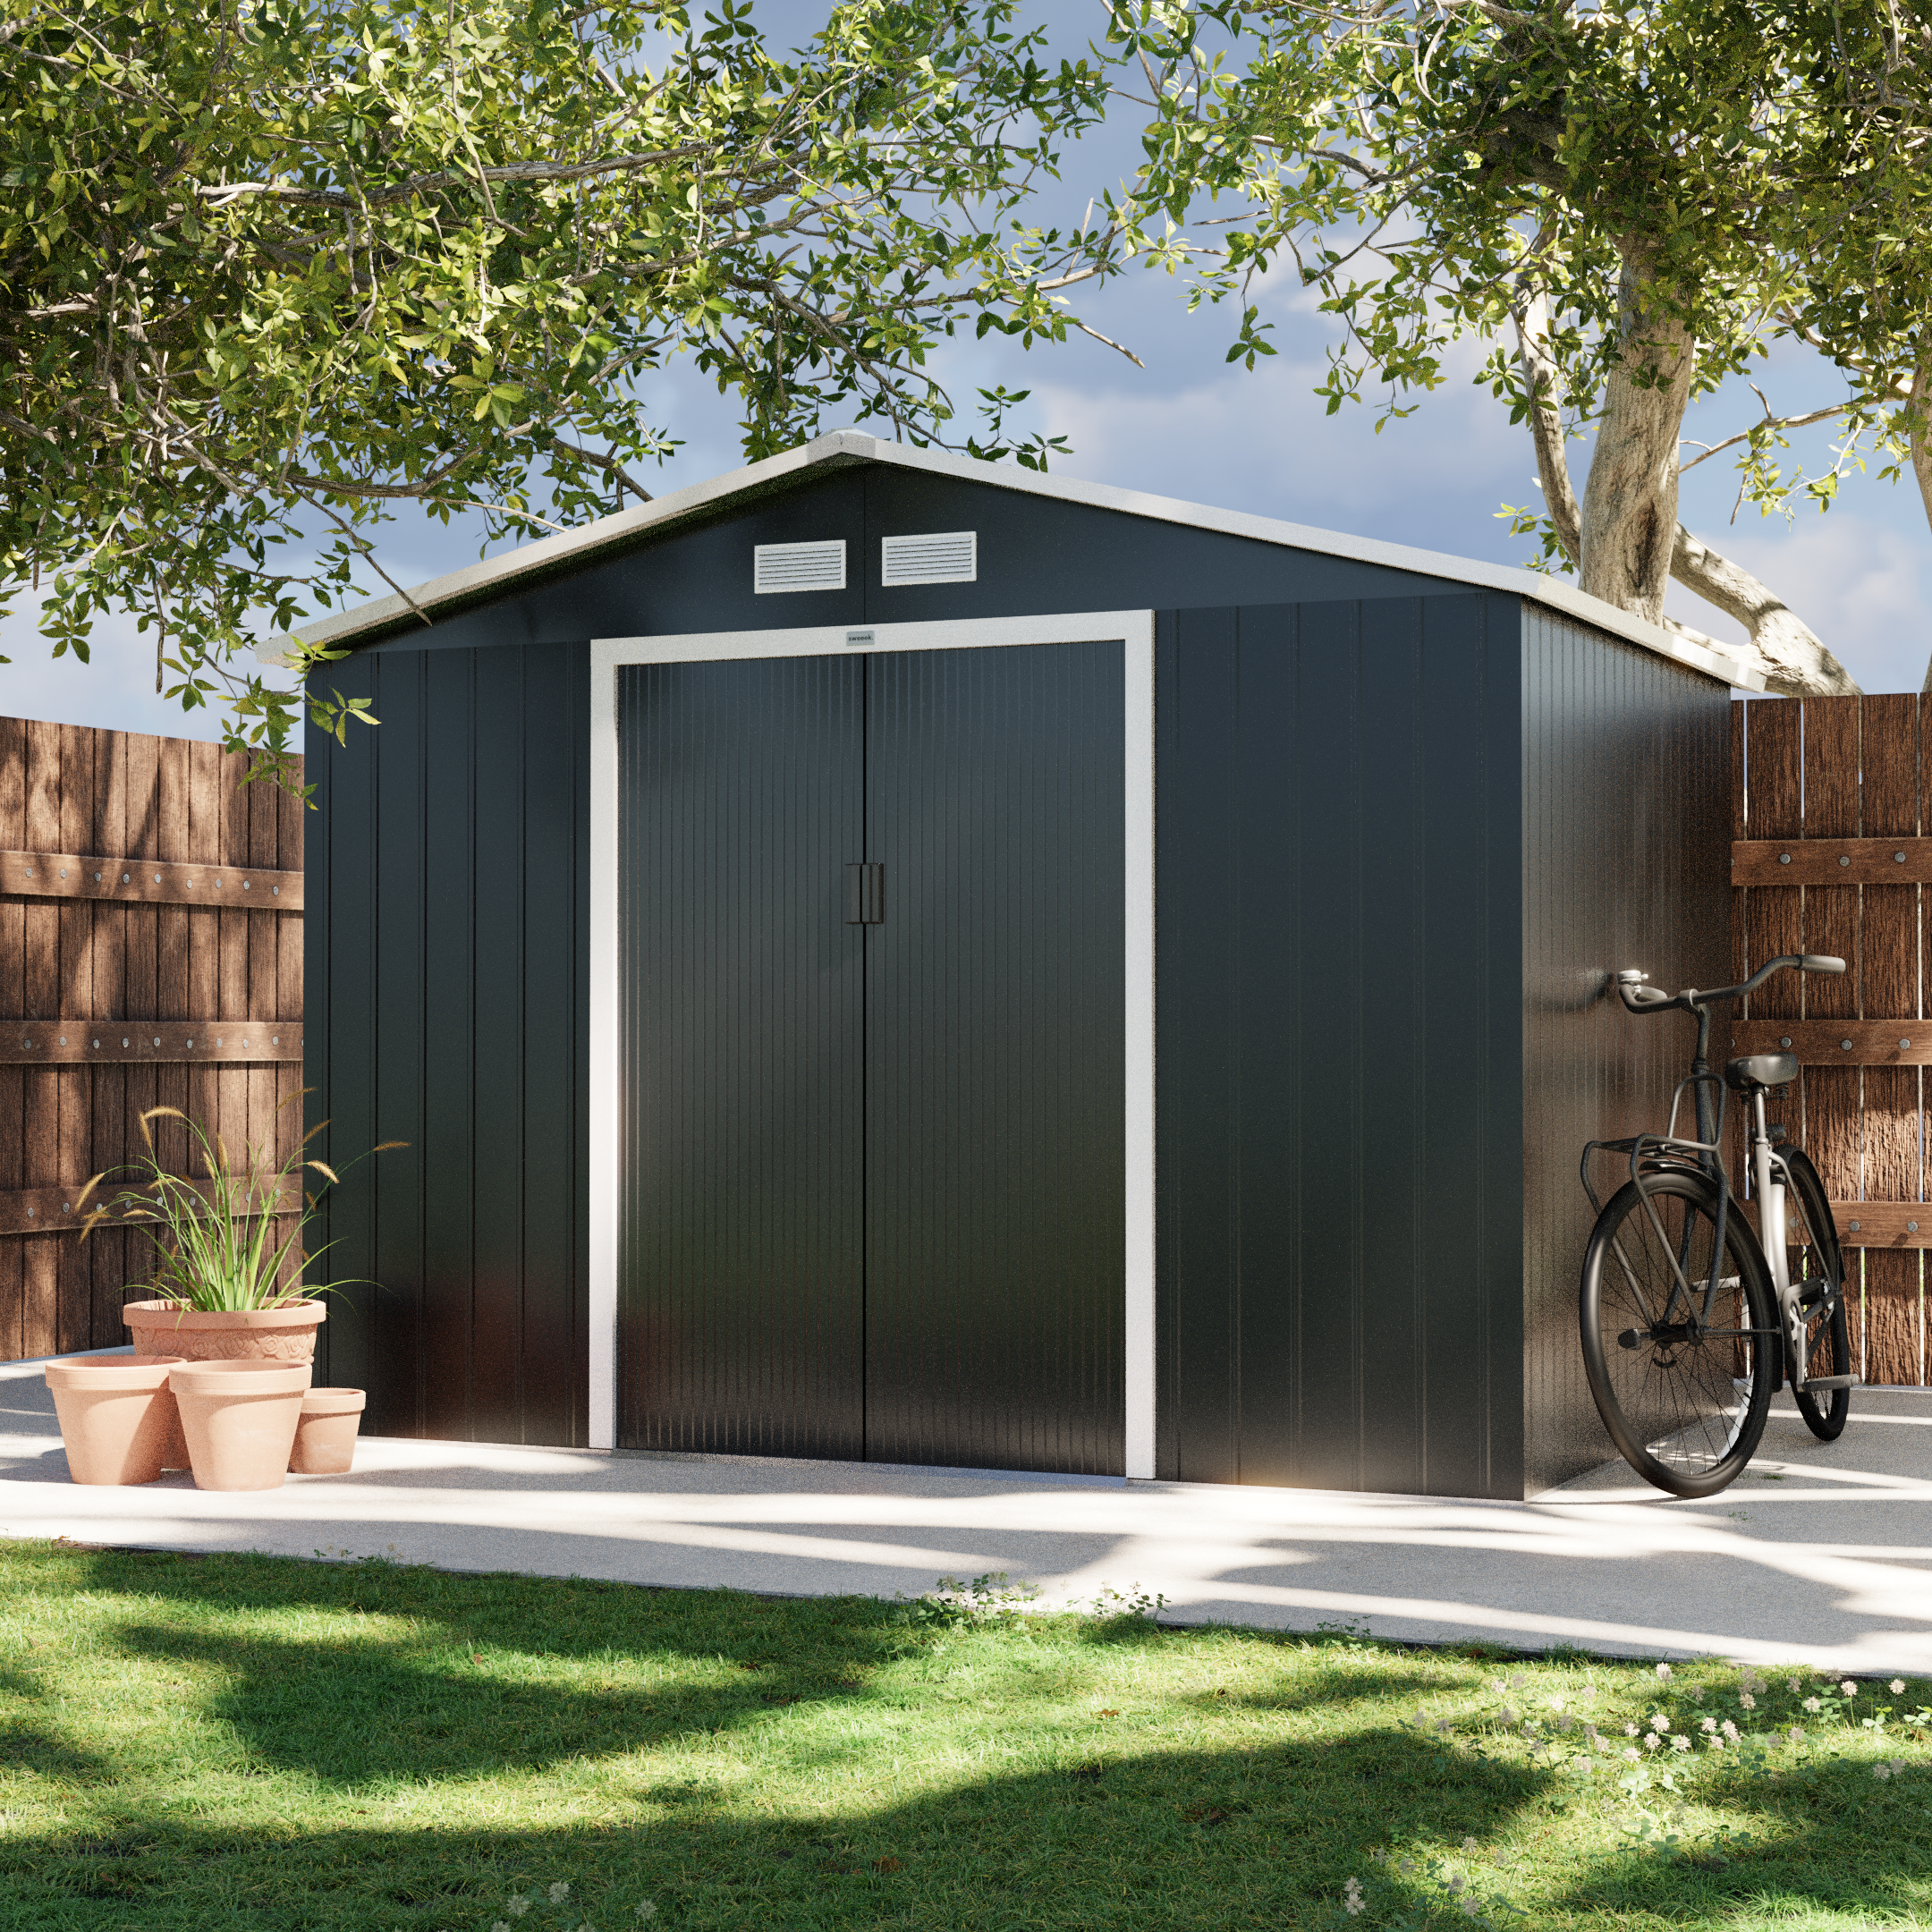 (9 X 6FT) 5.39m² Metal garden shed - Tool shed with single latch door, ground fixing kit supplied - Ferrain - Grey and White Photo1